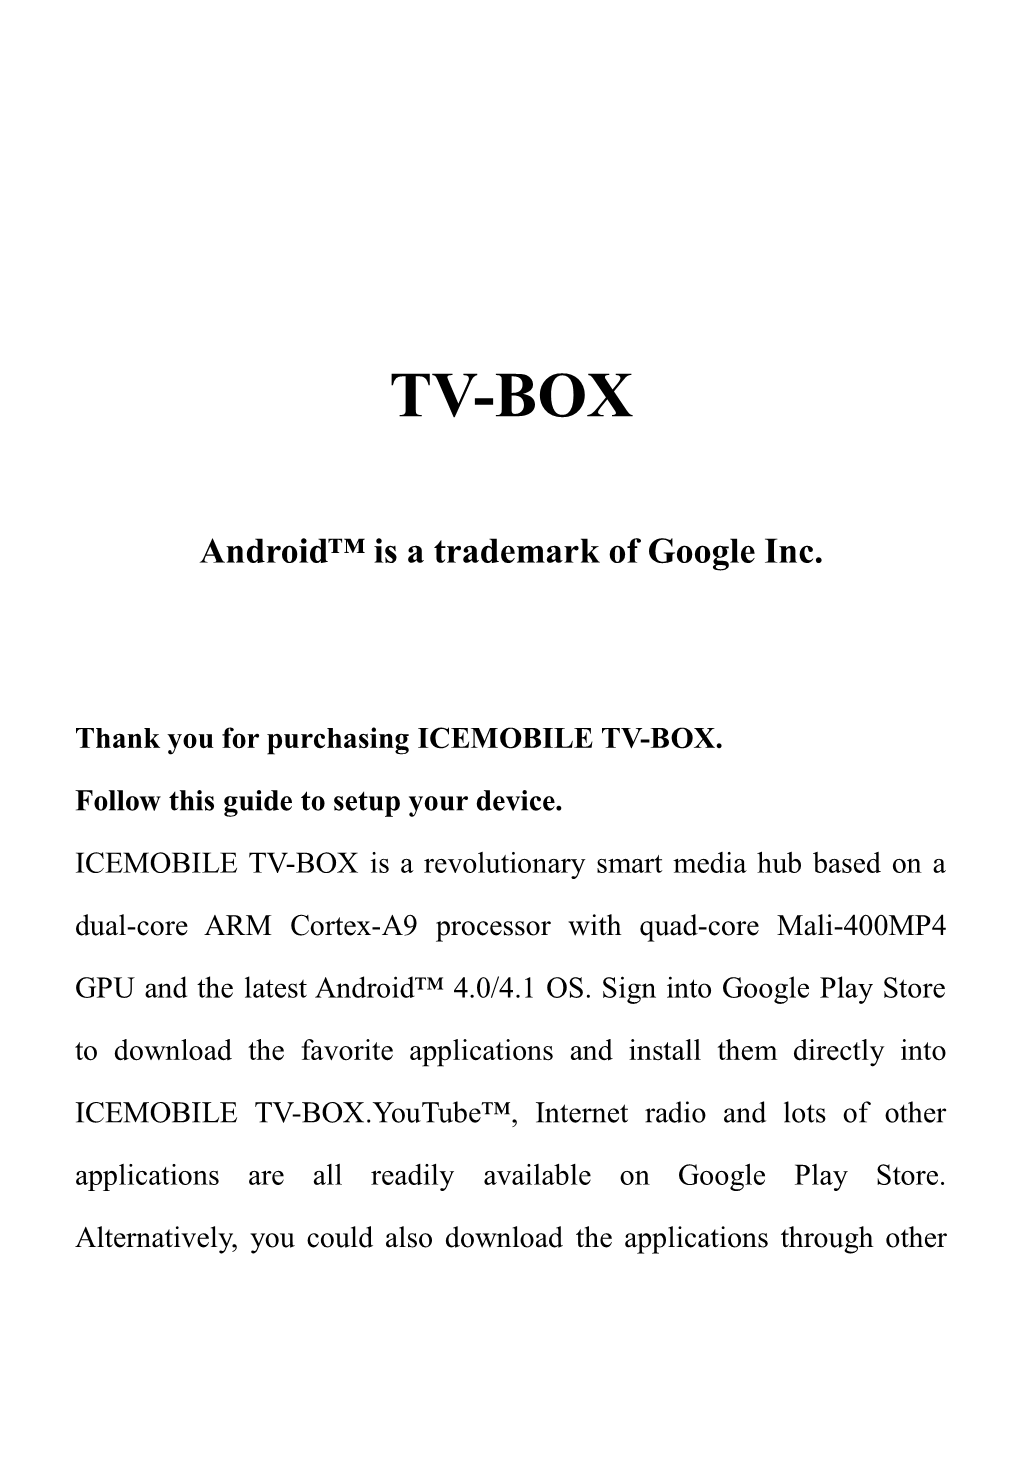 Android Is a Trademark of Google Inc